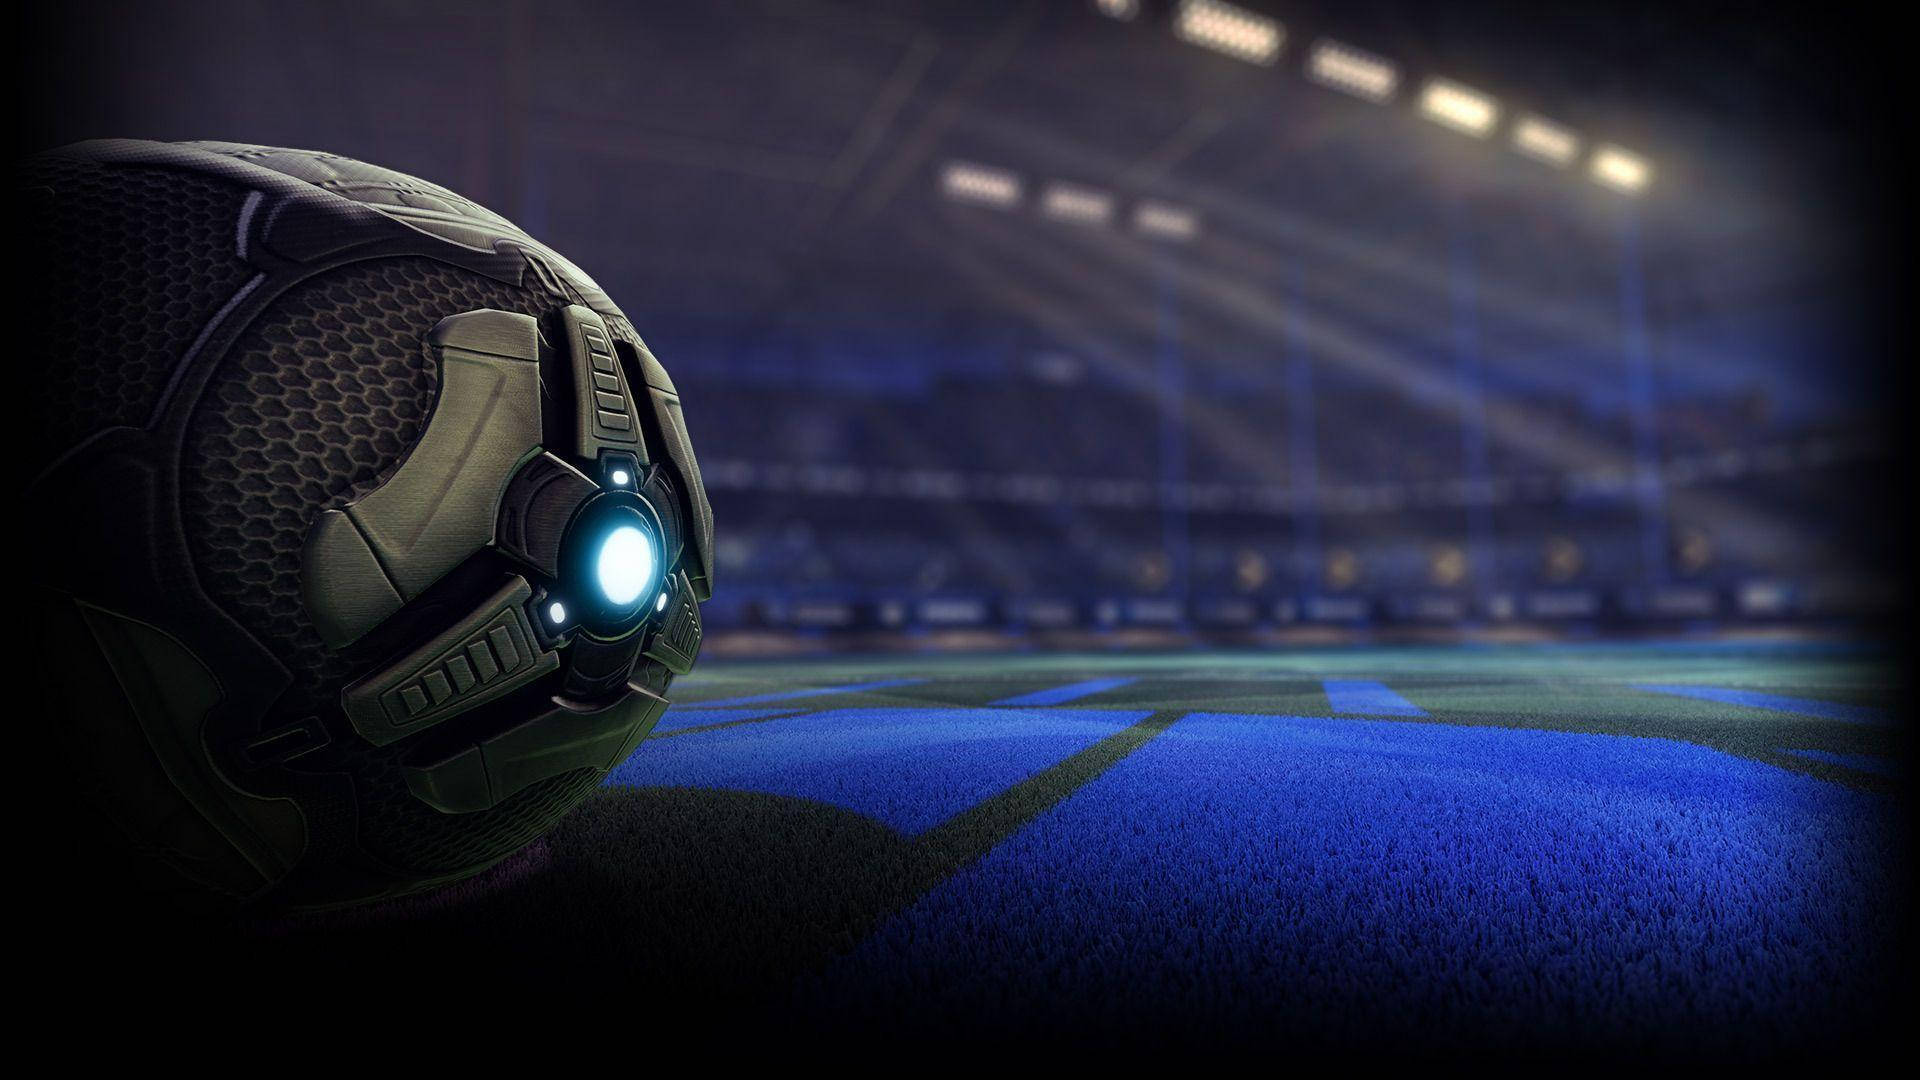 Rocket League 1920X1080 Wallpaper and Background Image